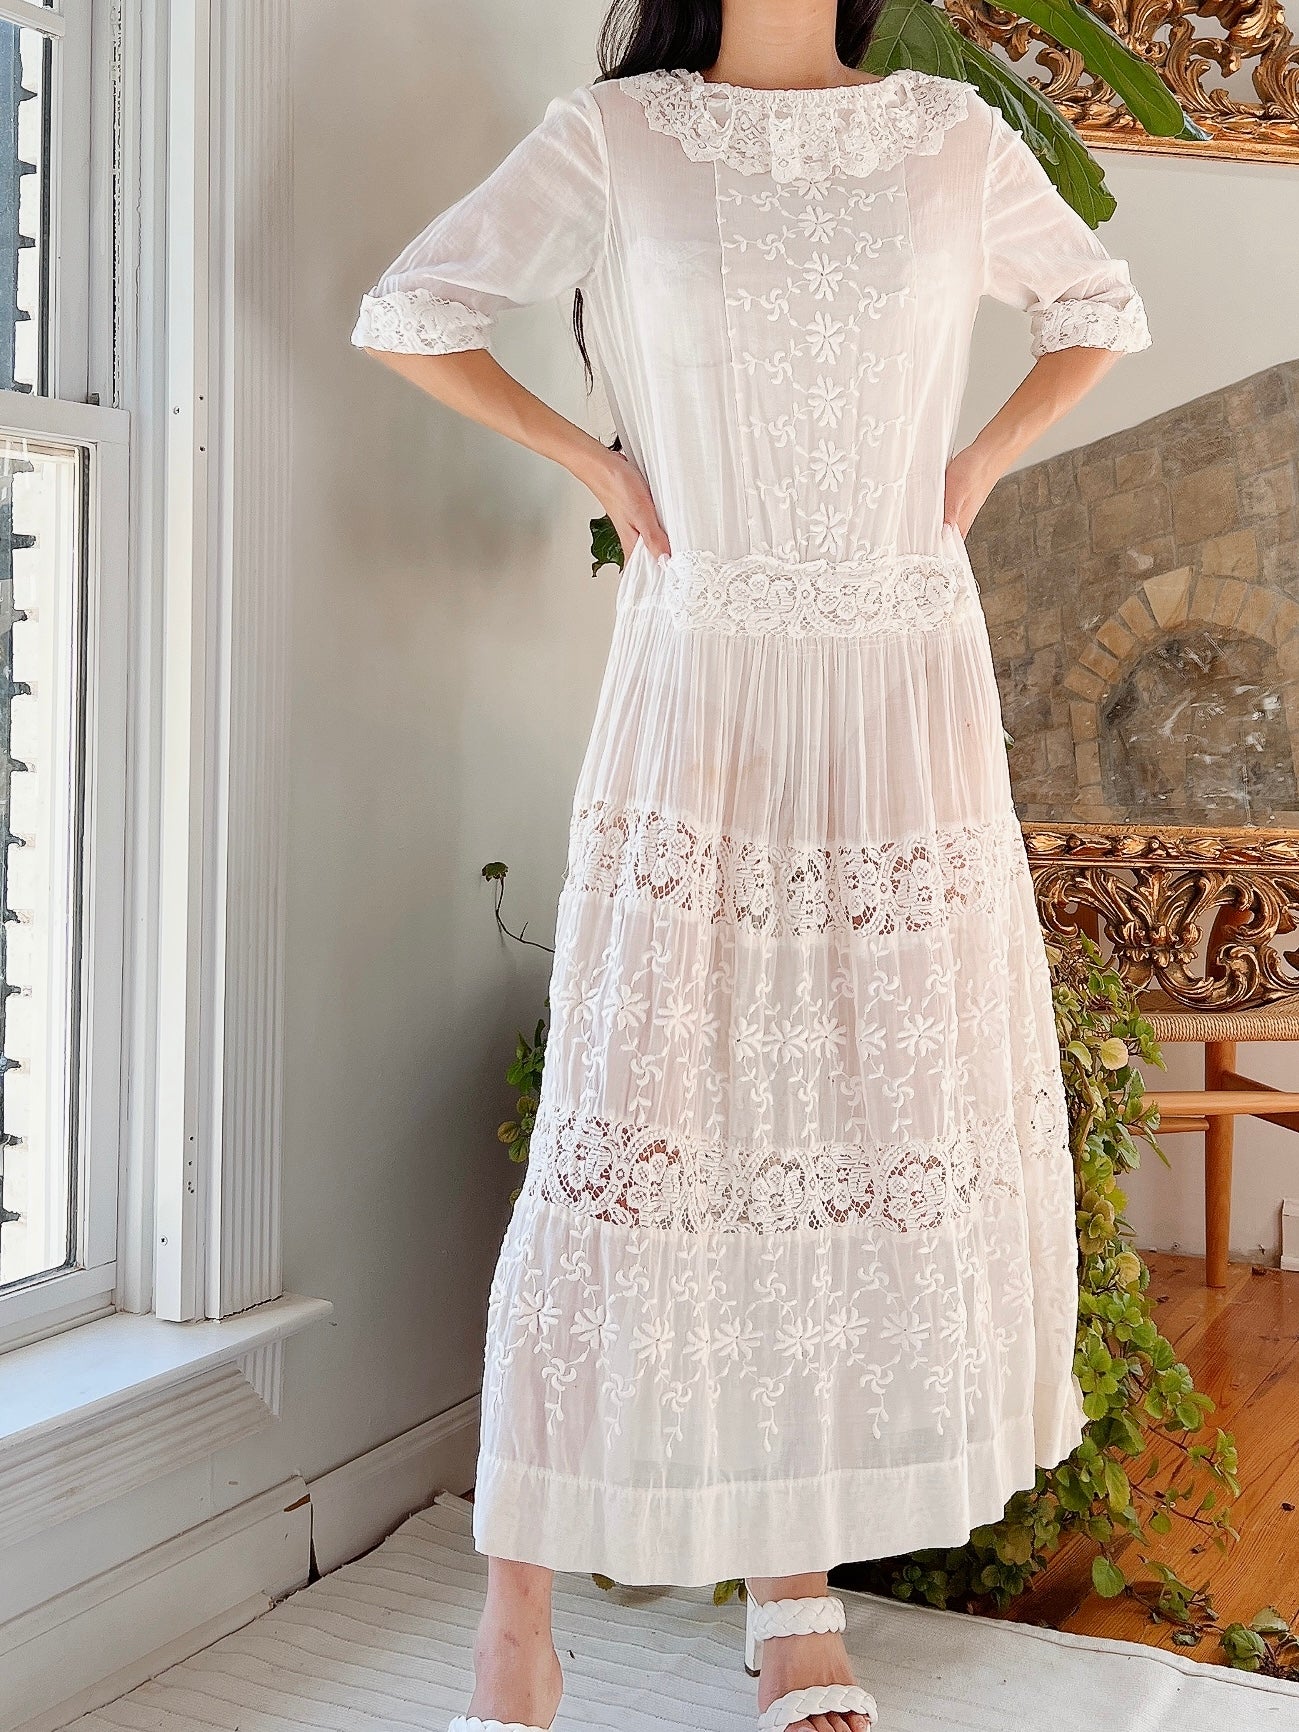 1910/1920s Cotton Embroidered Dress - M/L